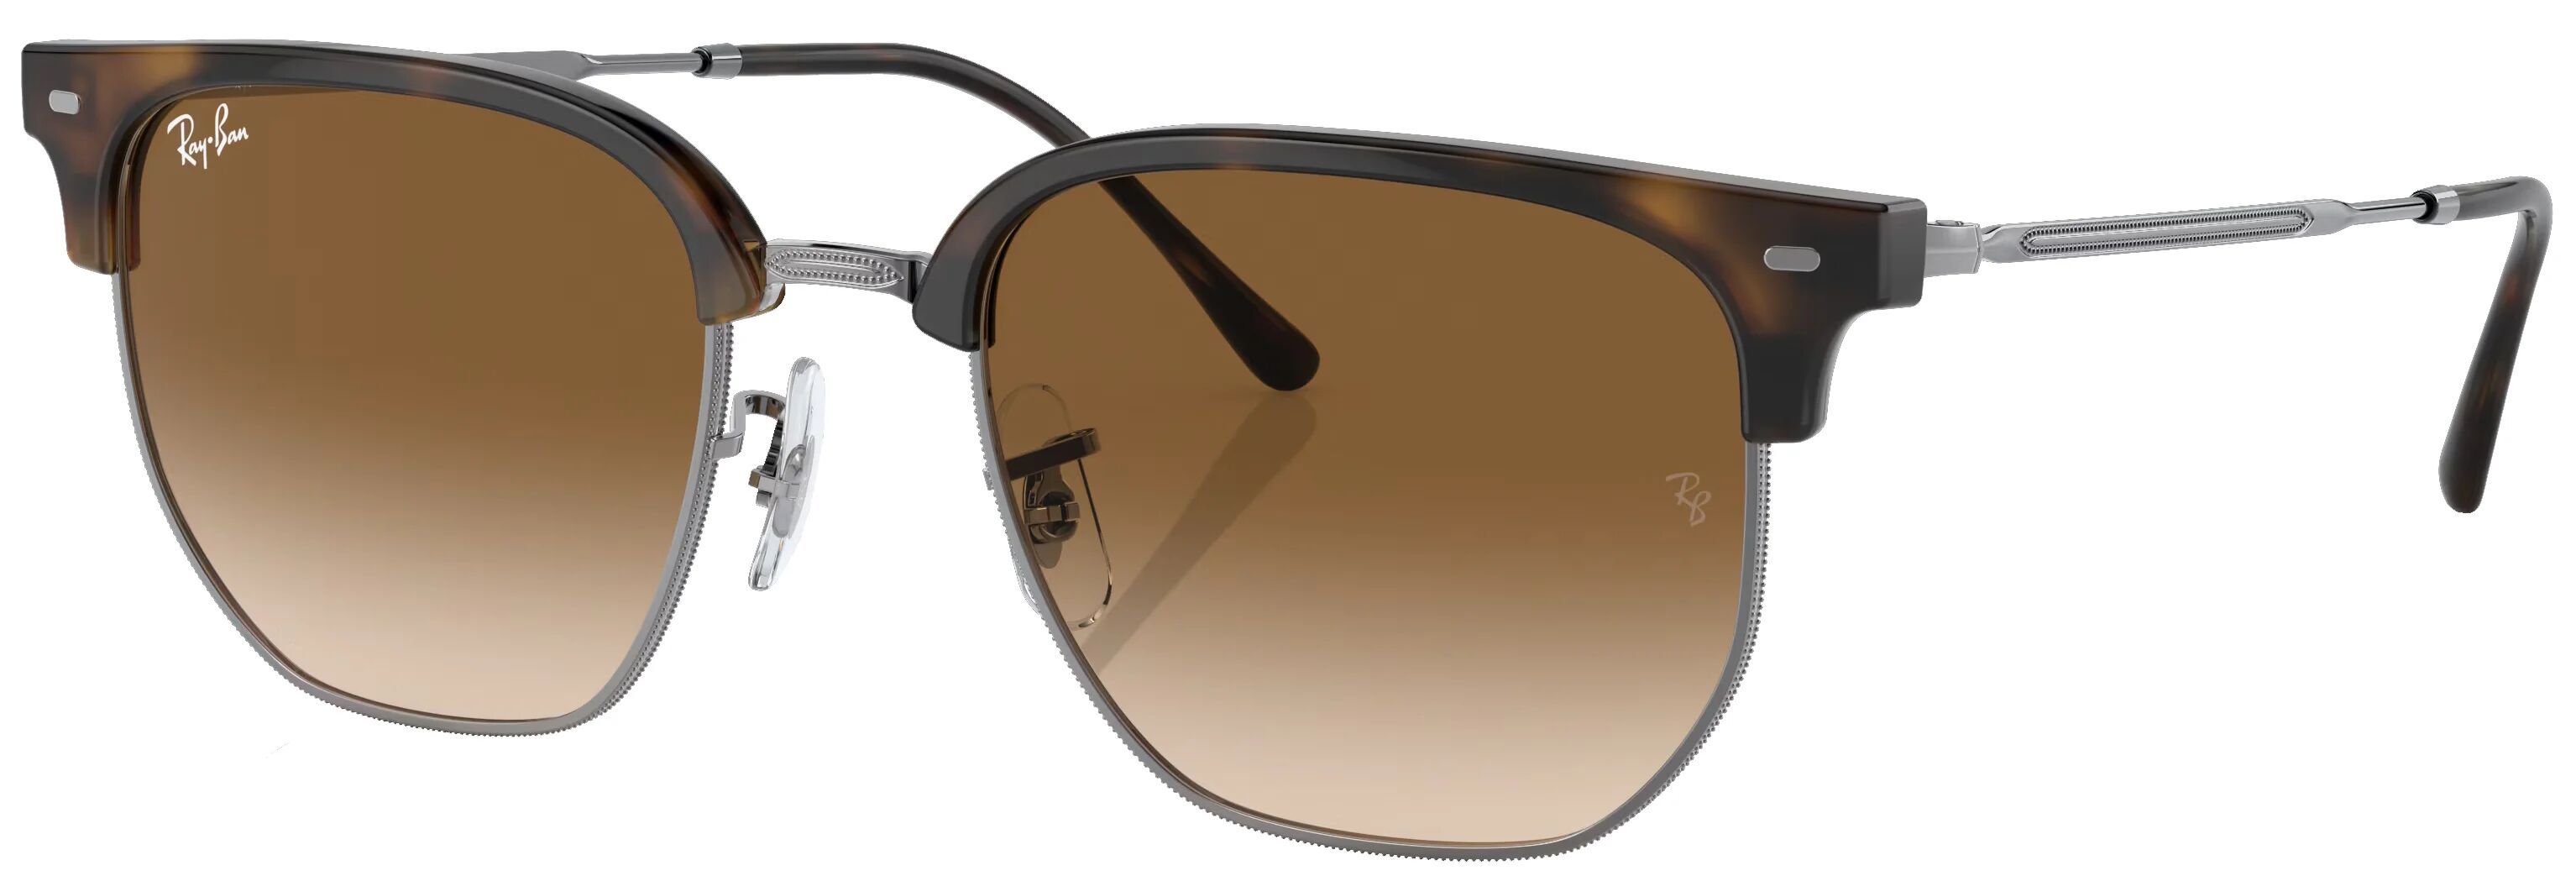 Ray-Ban New Clubmaster Polished Havana Sunglasses - Brown Lens